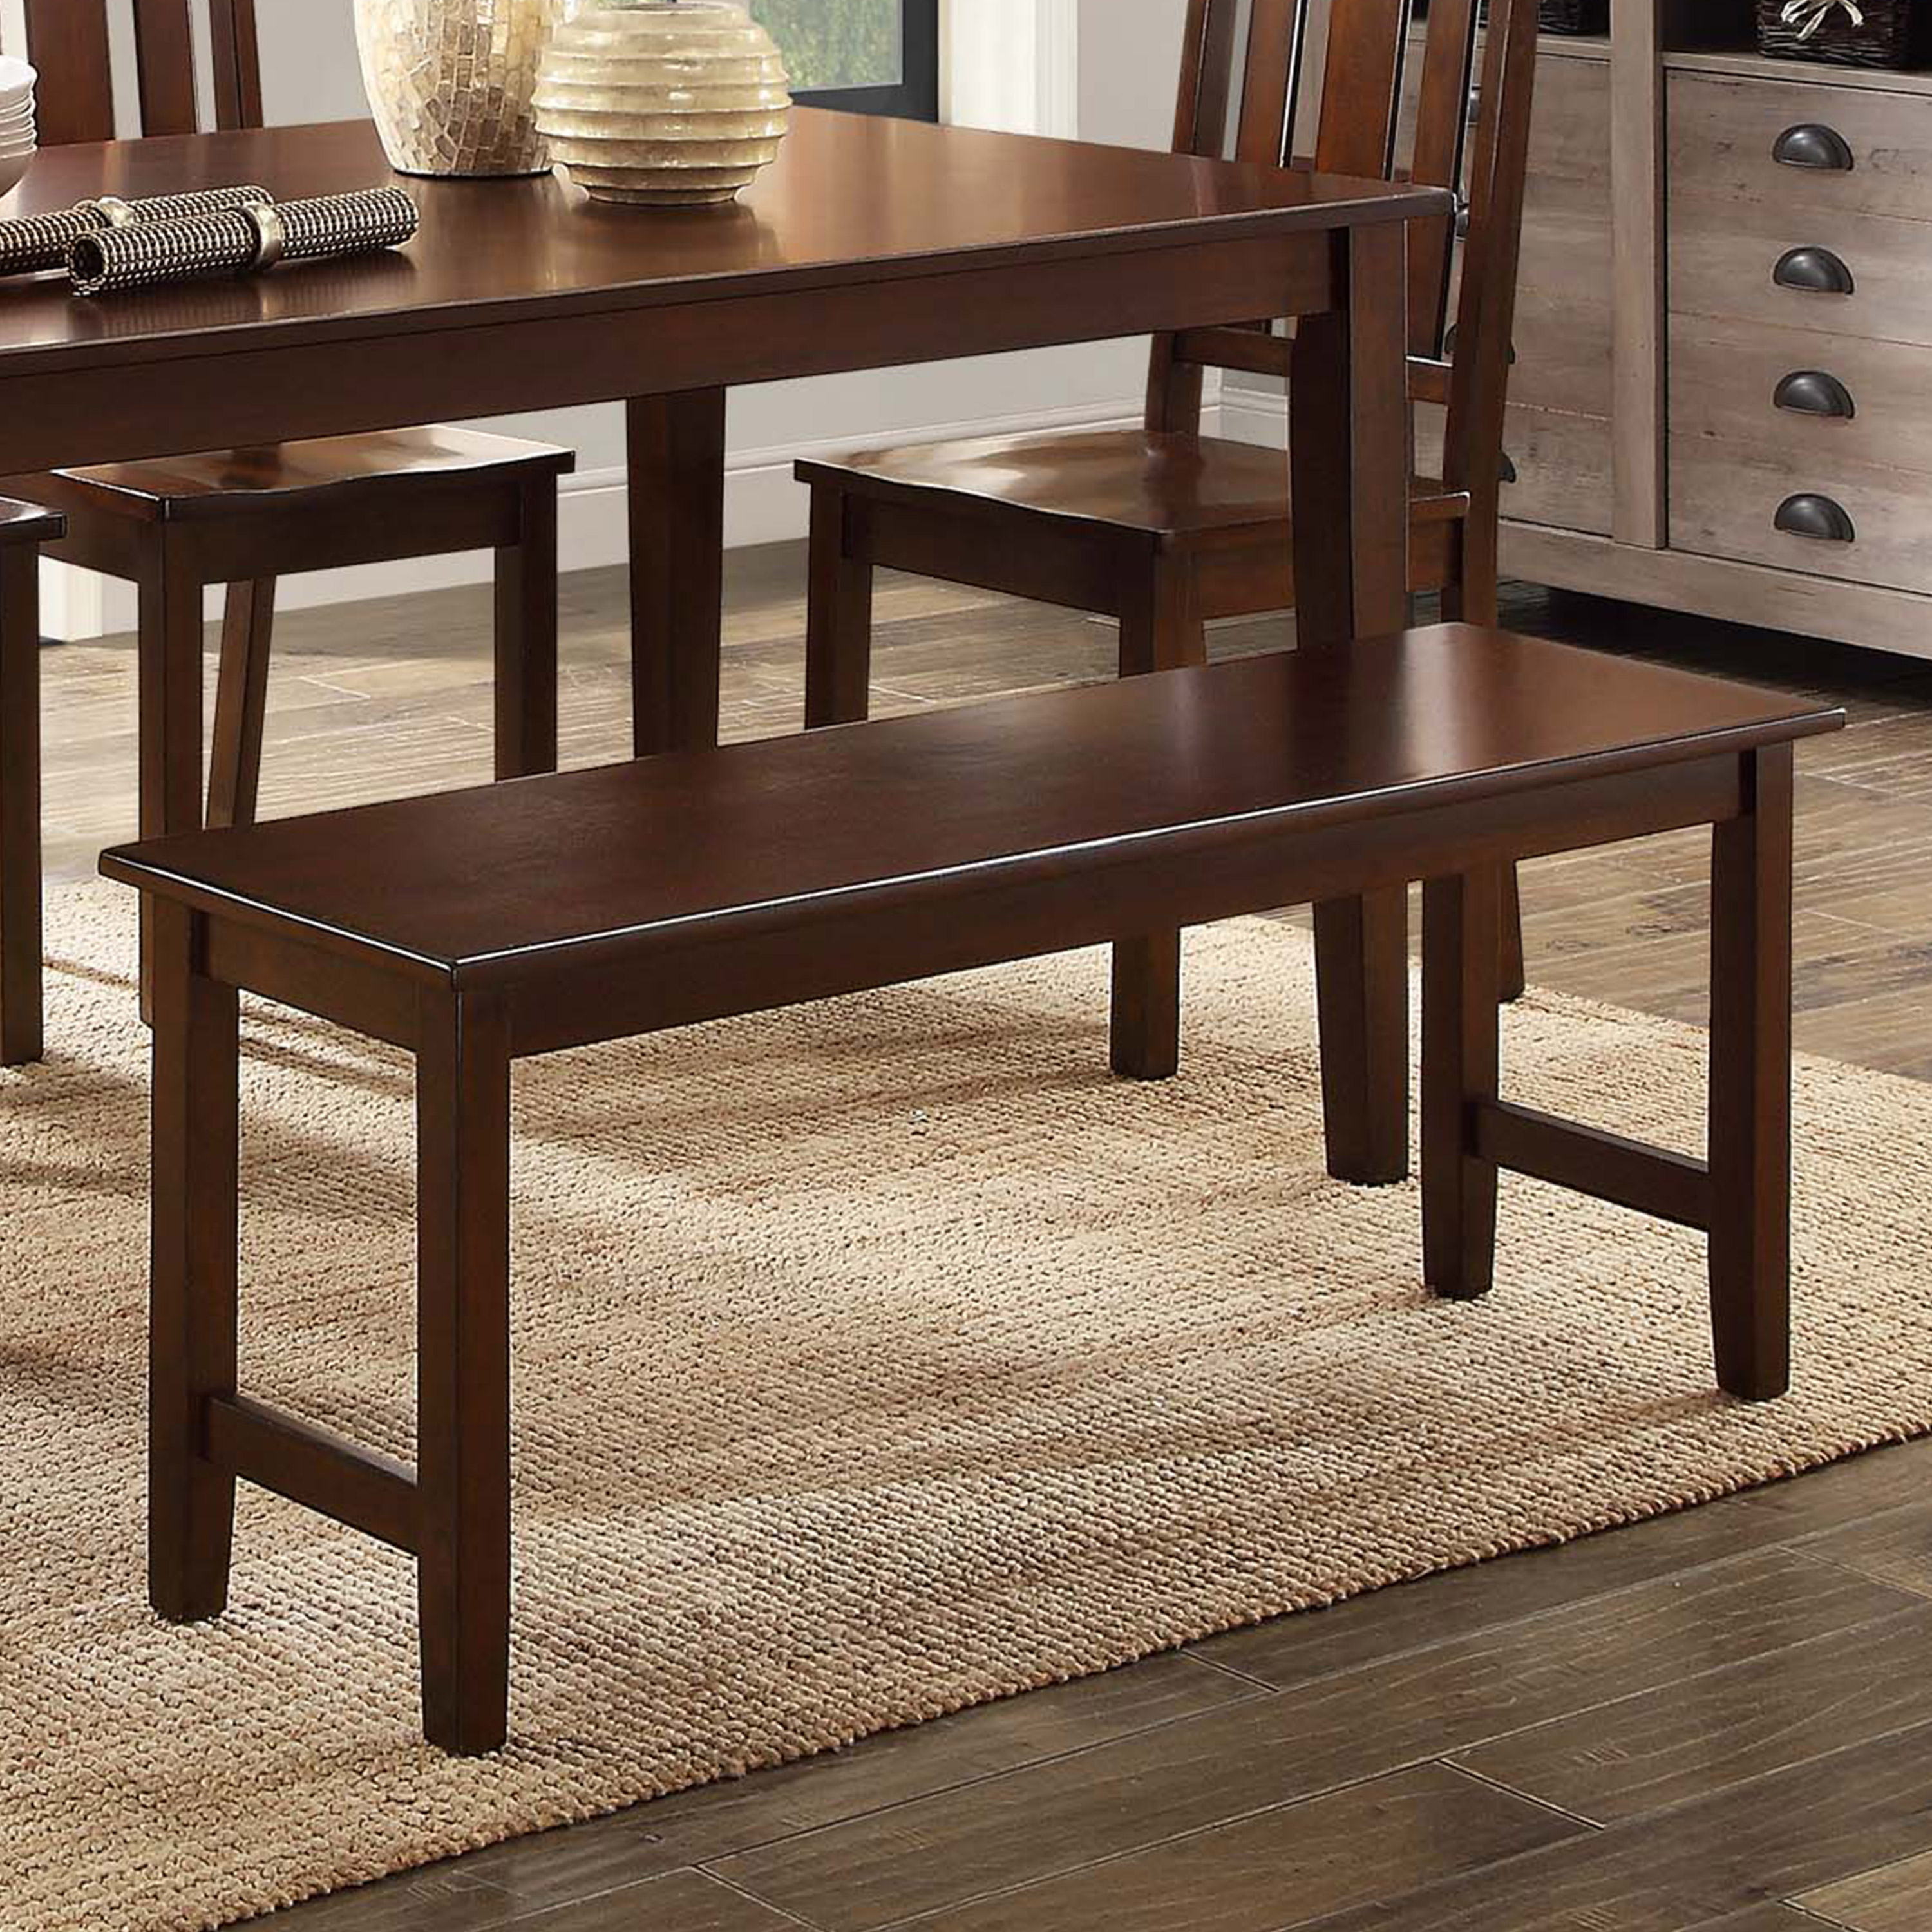 Better Homes and Gardens 6-Piece Dining Set with Upholstered Chairs &amp; Bench, Mocha/Beige - image 2 of 4